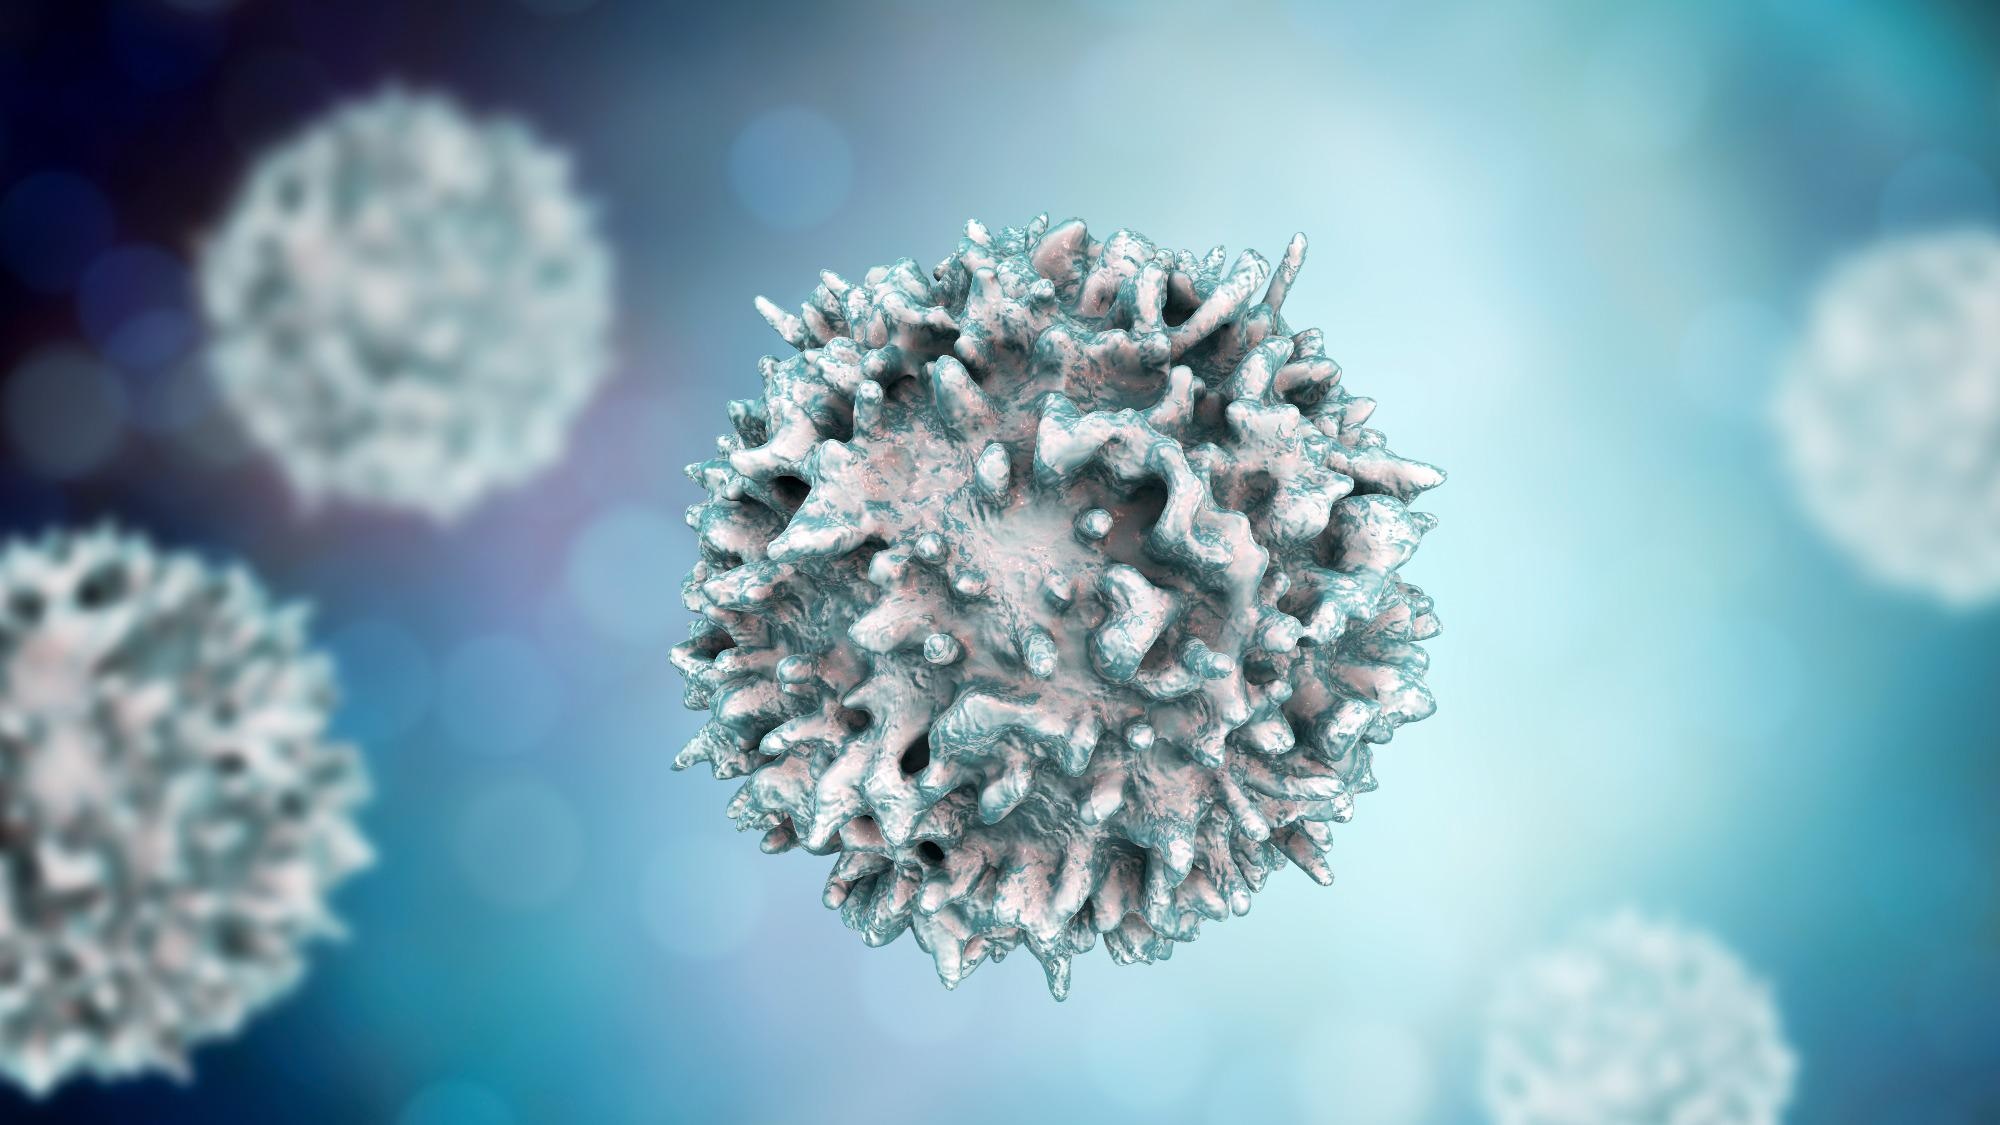 Study: T cell response against SARS-CoV-2 persists after one year in patients surviving severe COVID-19. Image Credit: Kateryna Kon